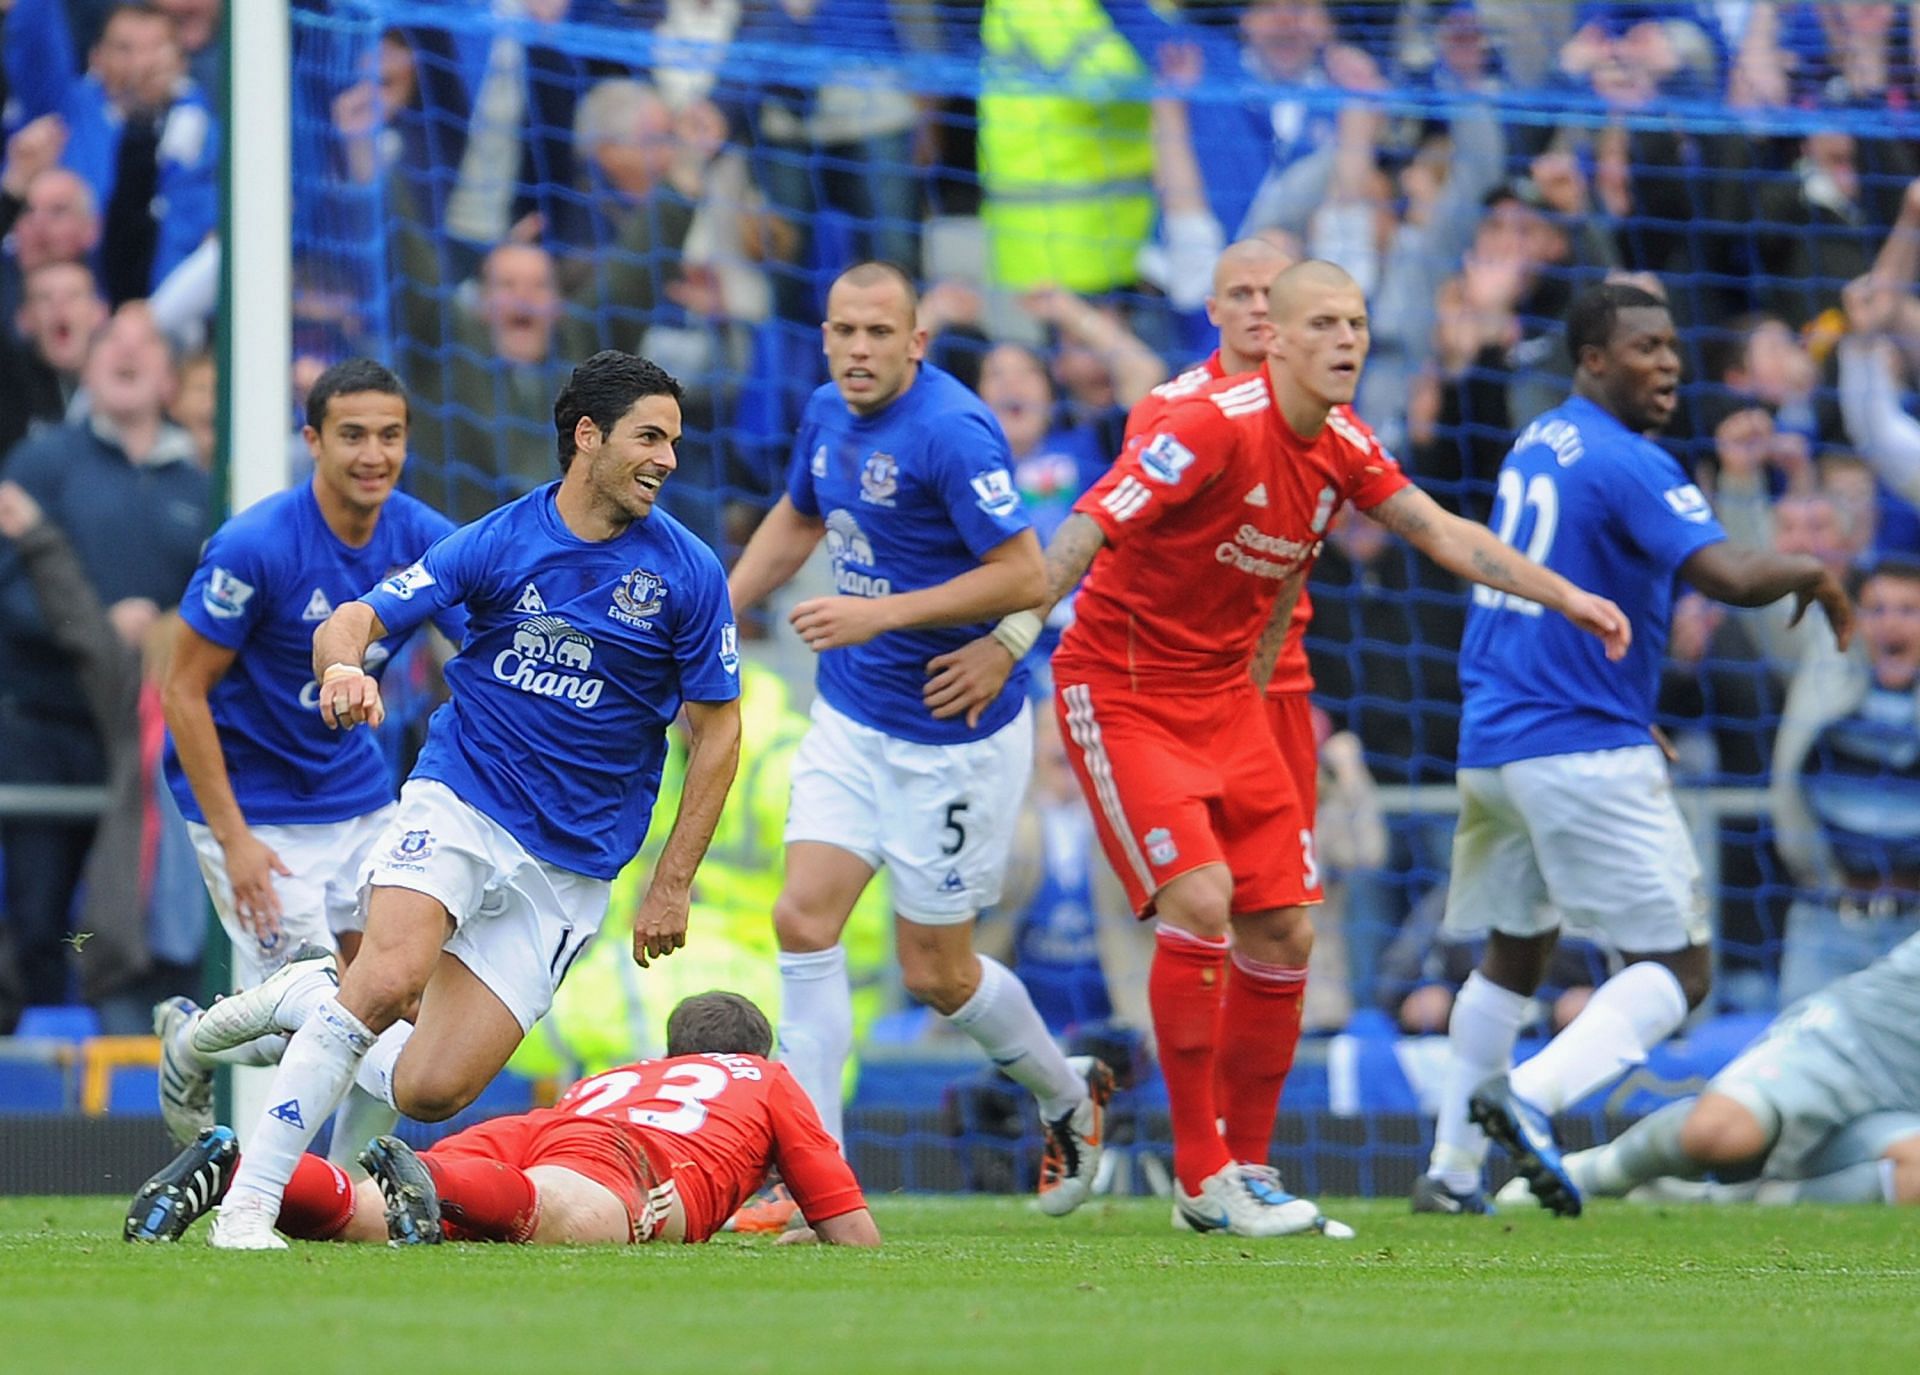 Liverpool v Everton at Goodison Park in 2010